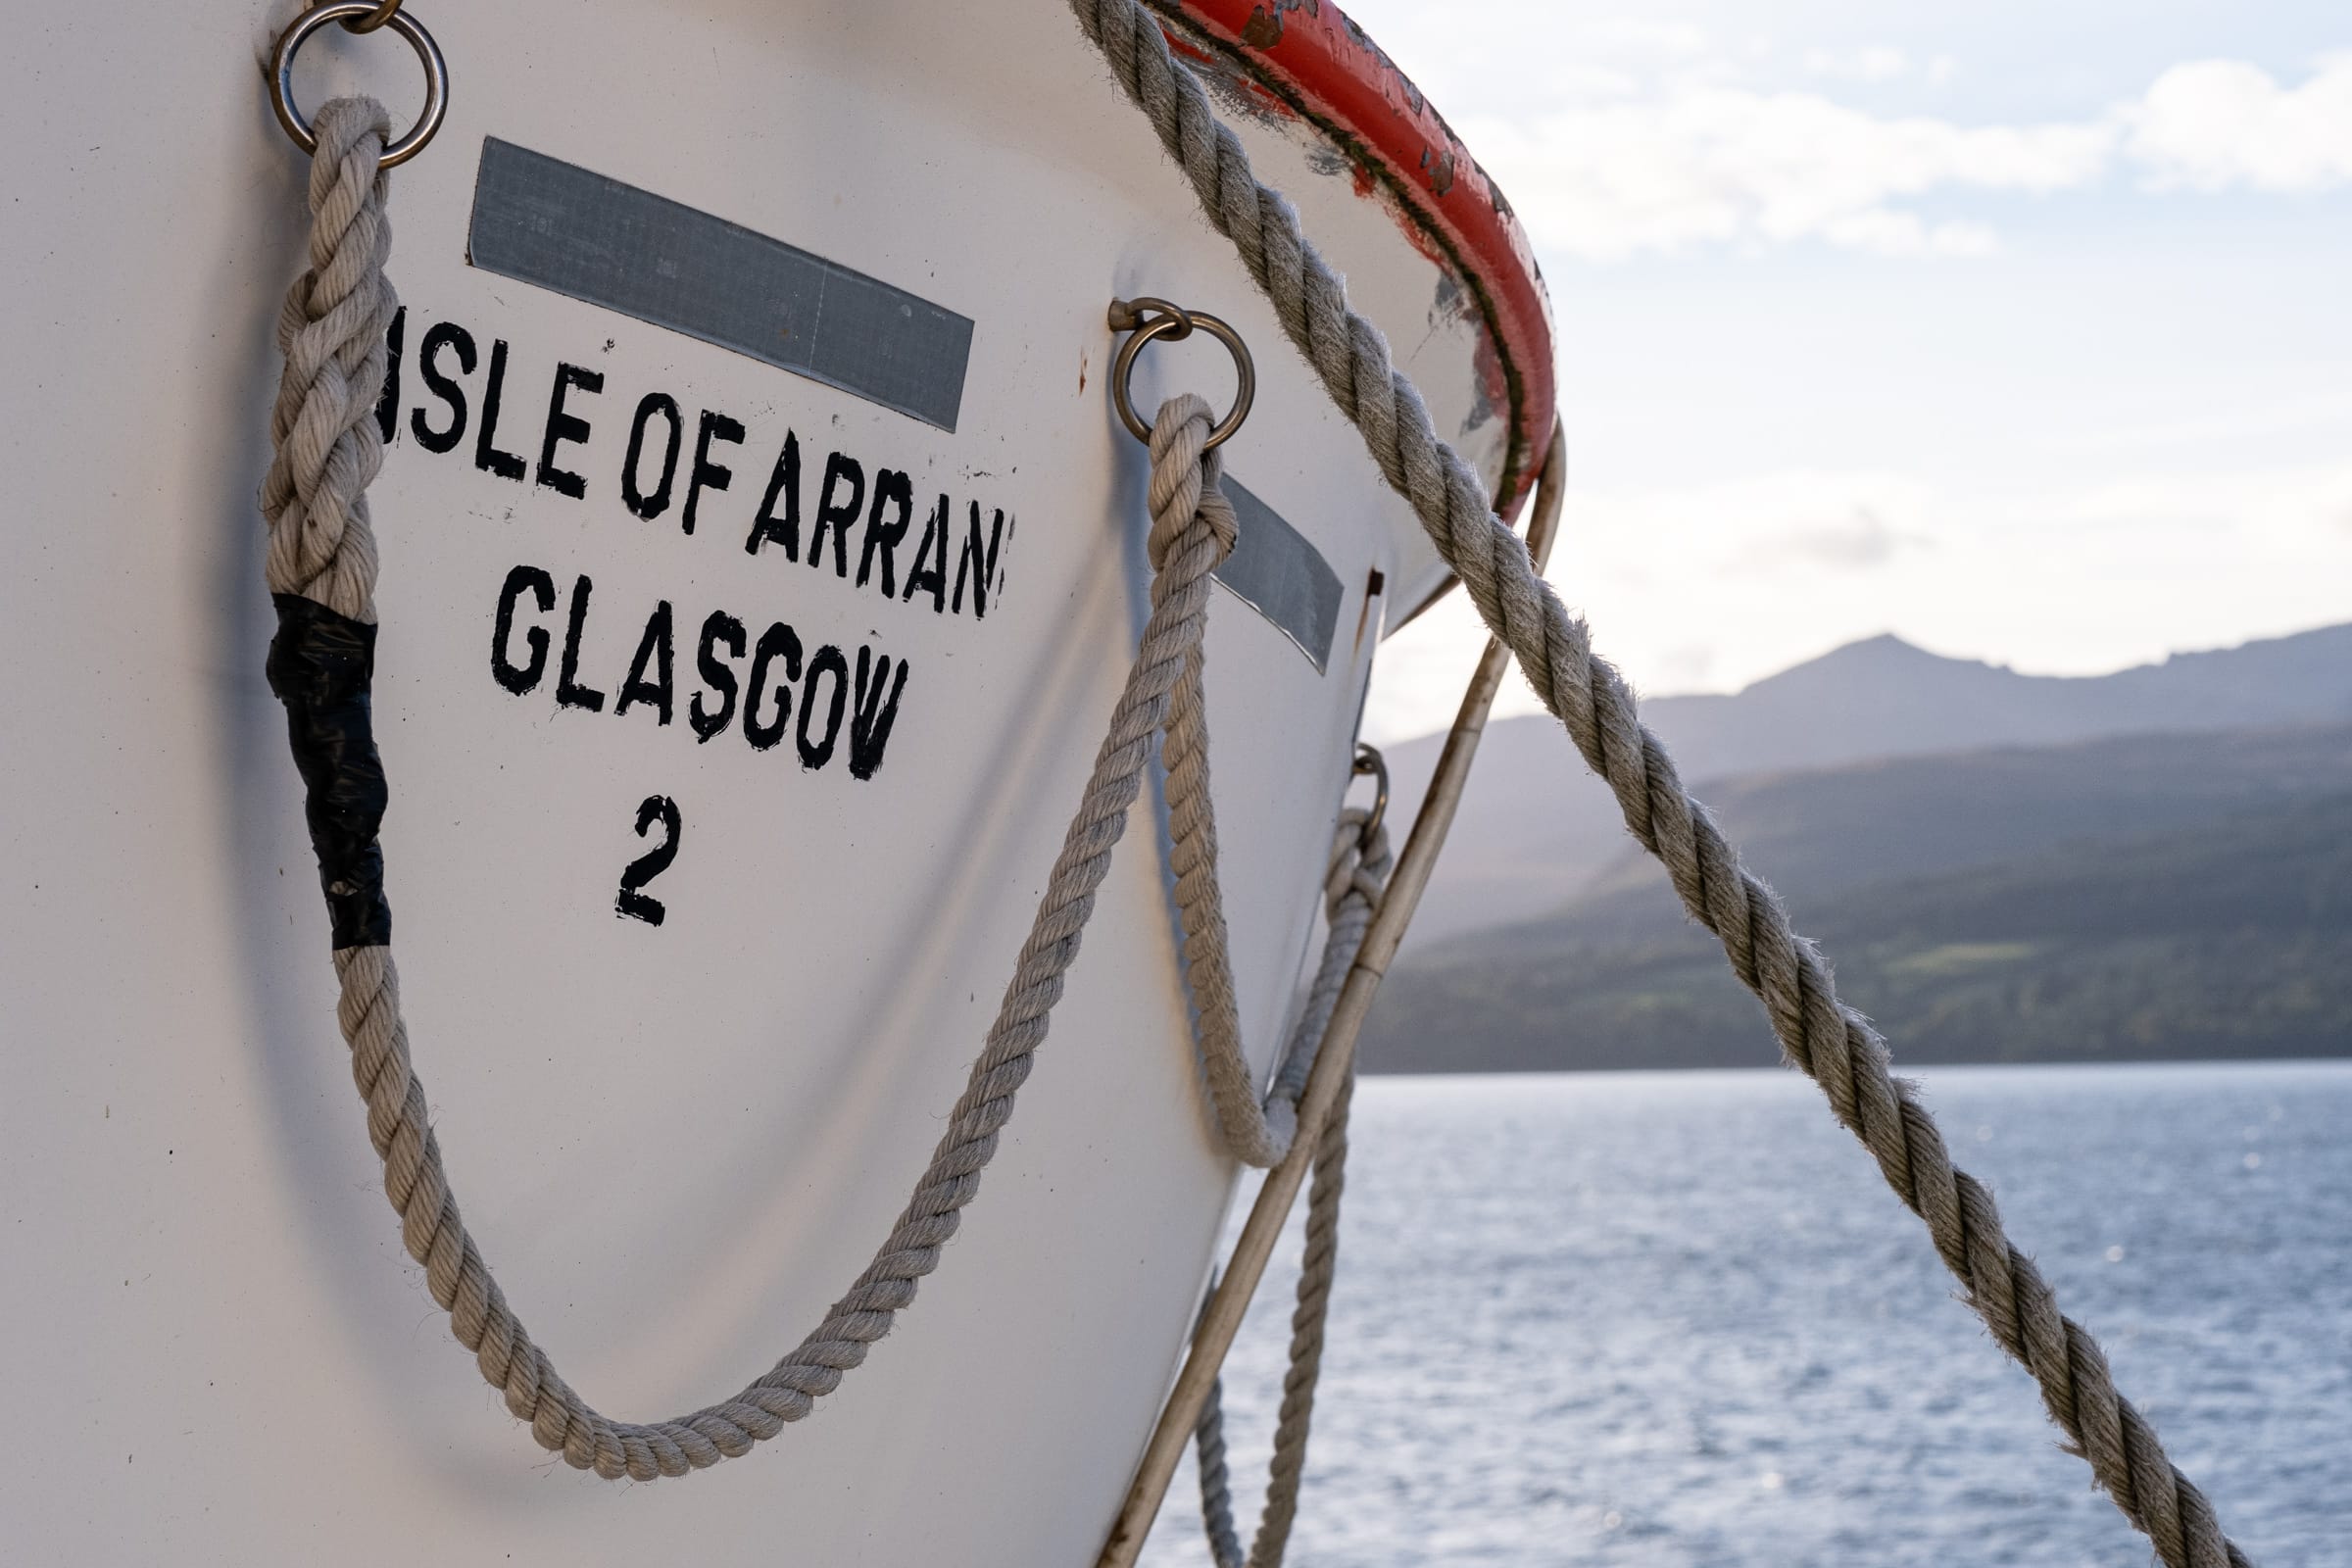 A lifeboat with the name Isle of Arran printed on the side.